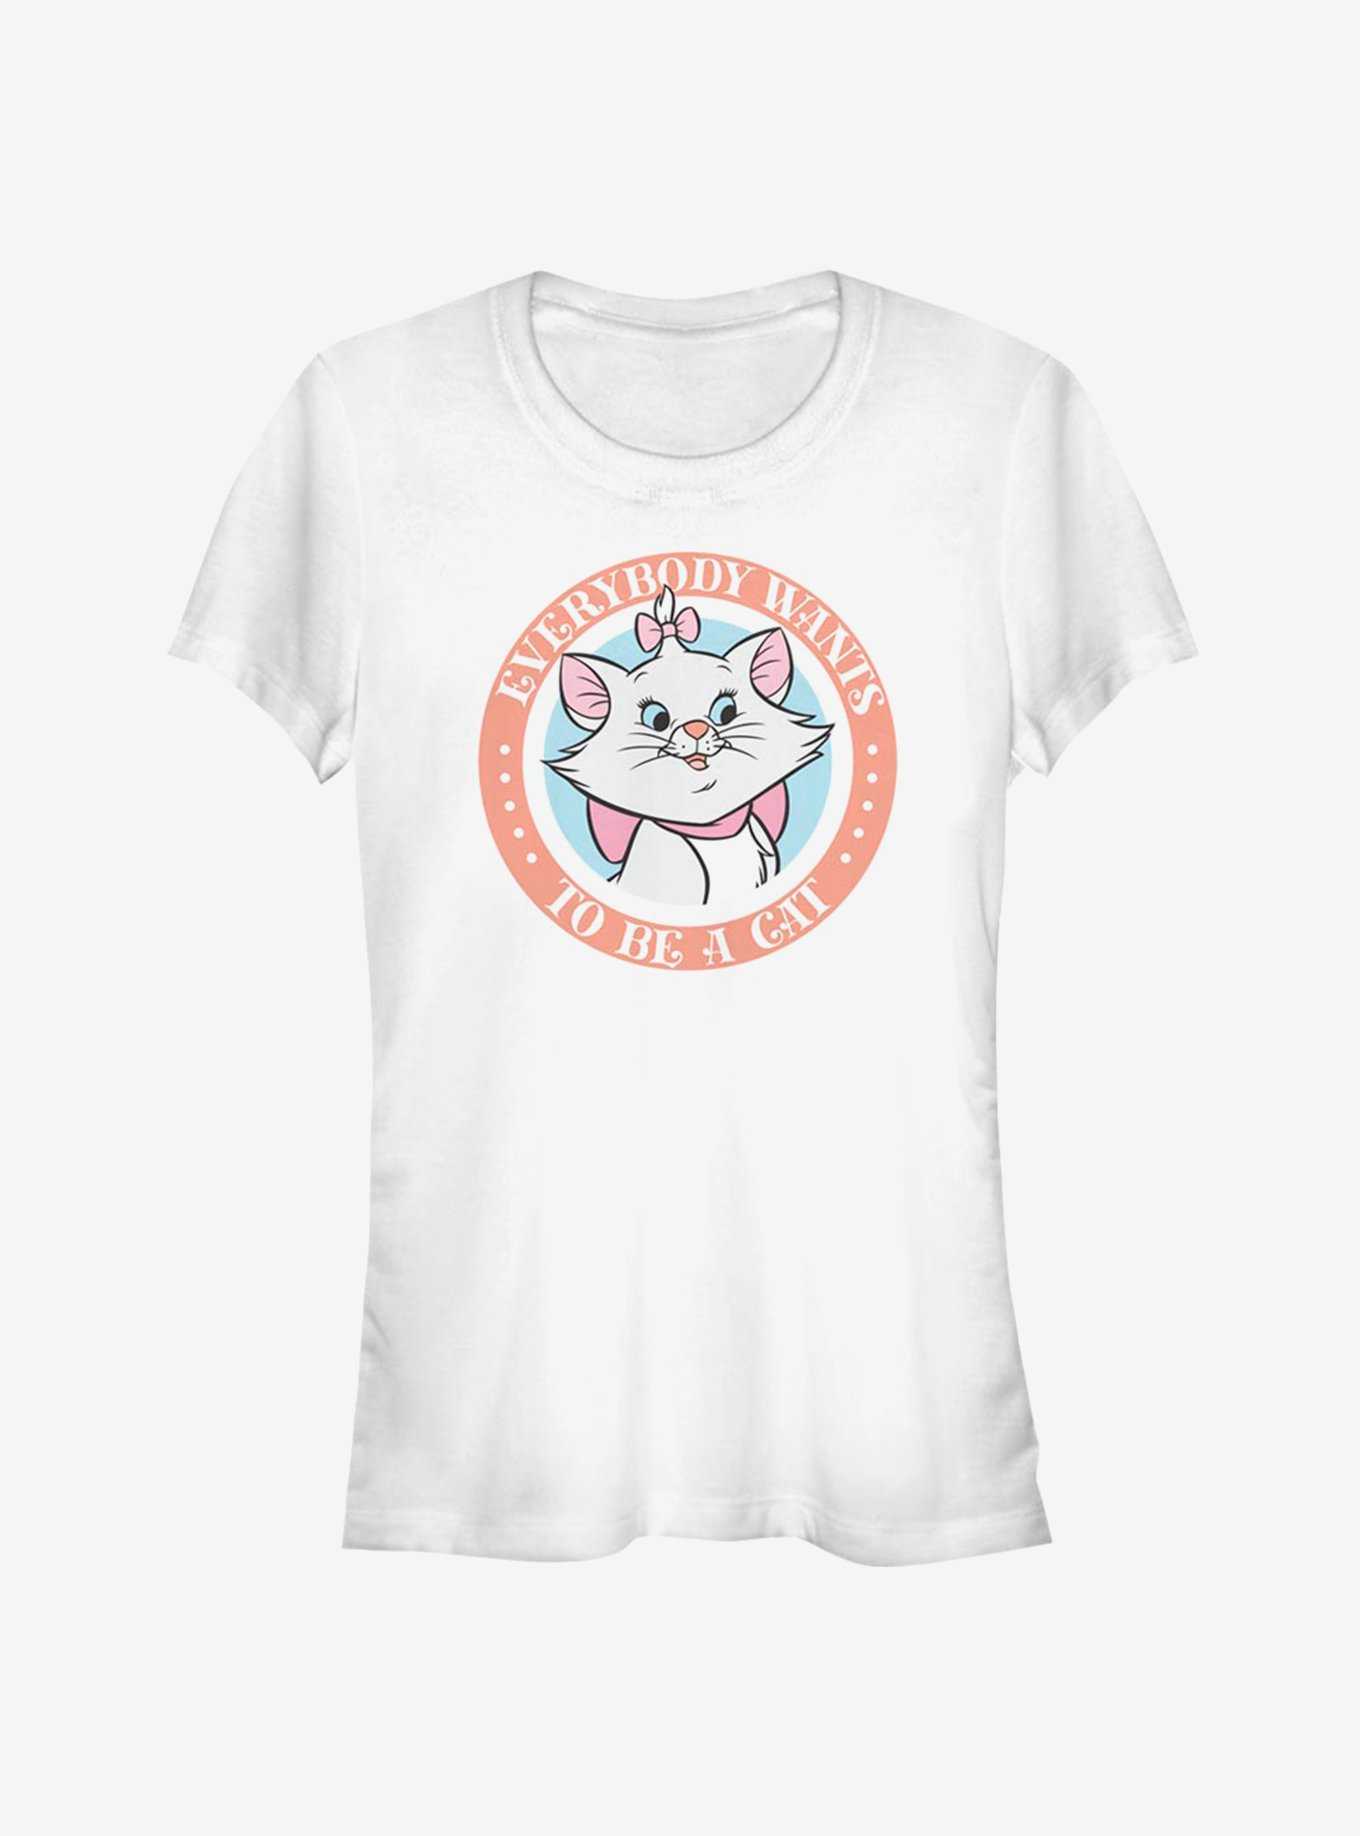 Disney Aristocats Marie Everybody Wants To Be A Cat Classic Girls T-Shirt, , hi-res